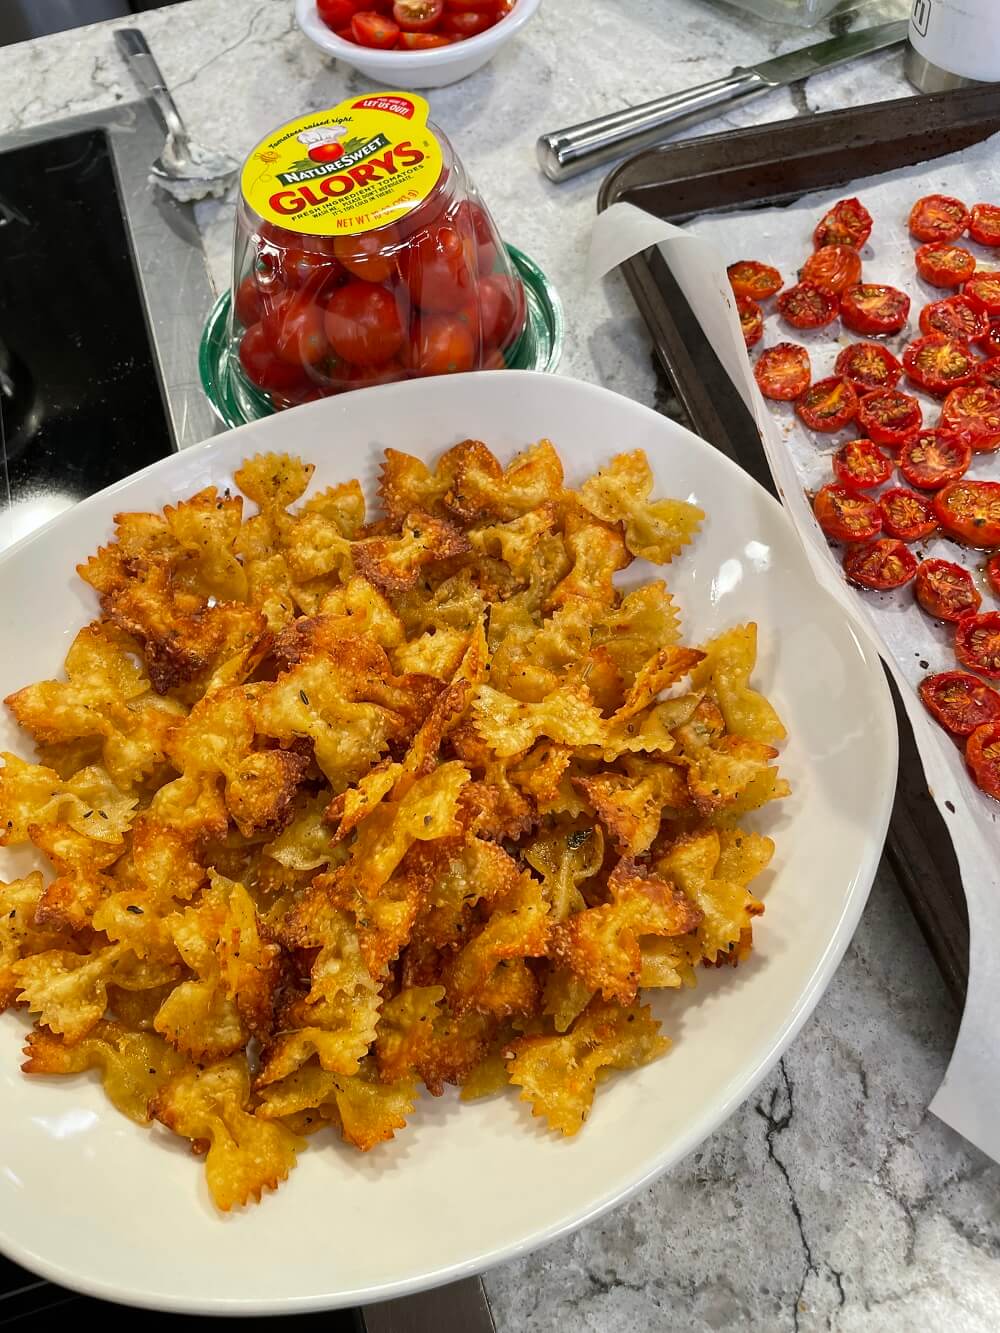 Glorys Pasta Chips and Dip, one of summer's most popular recipes